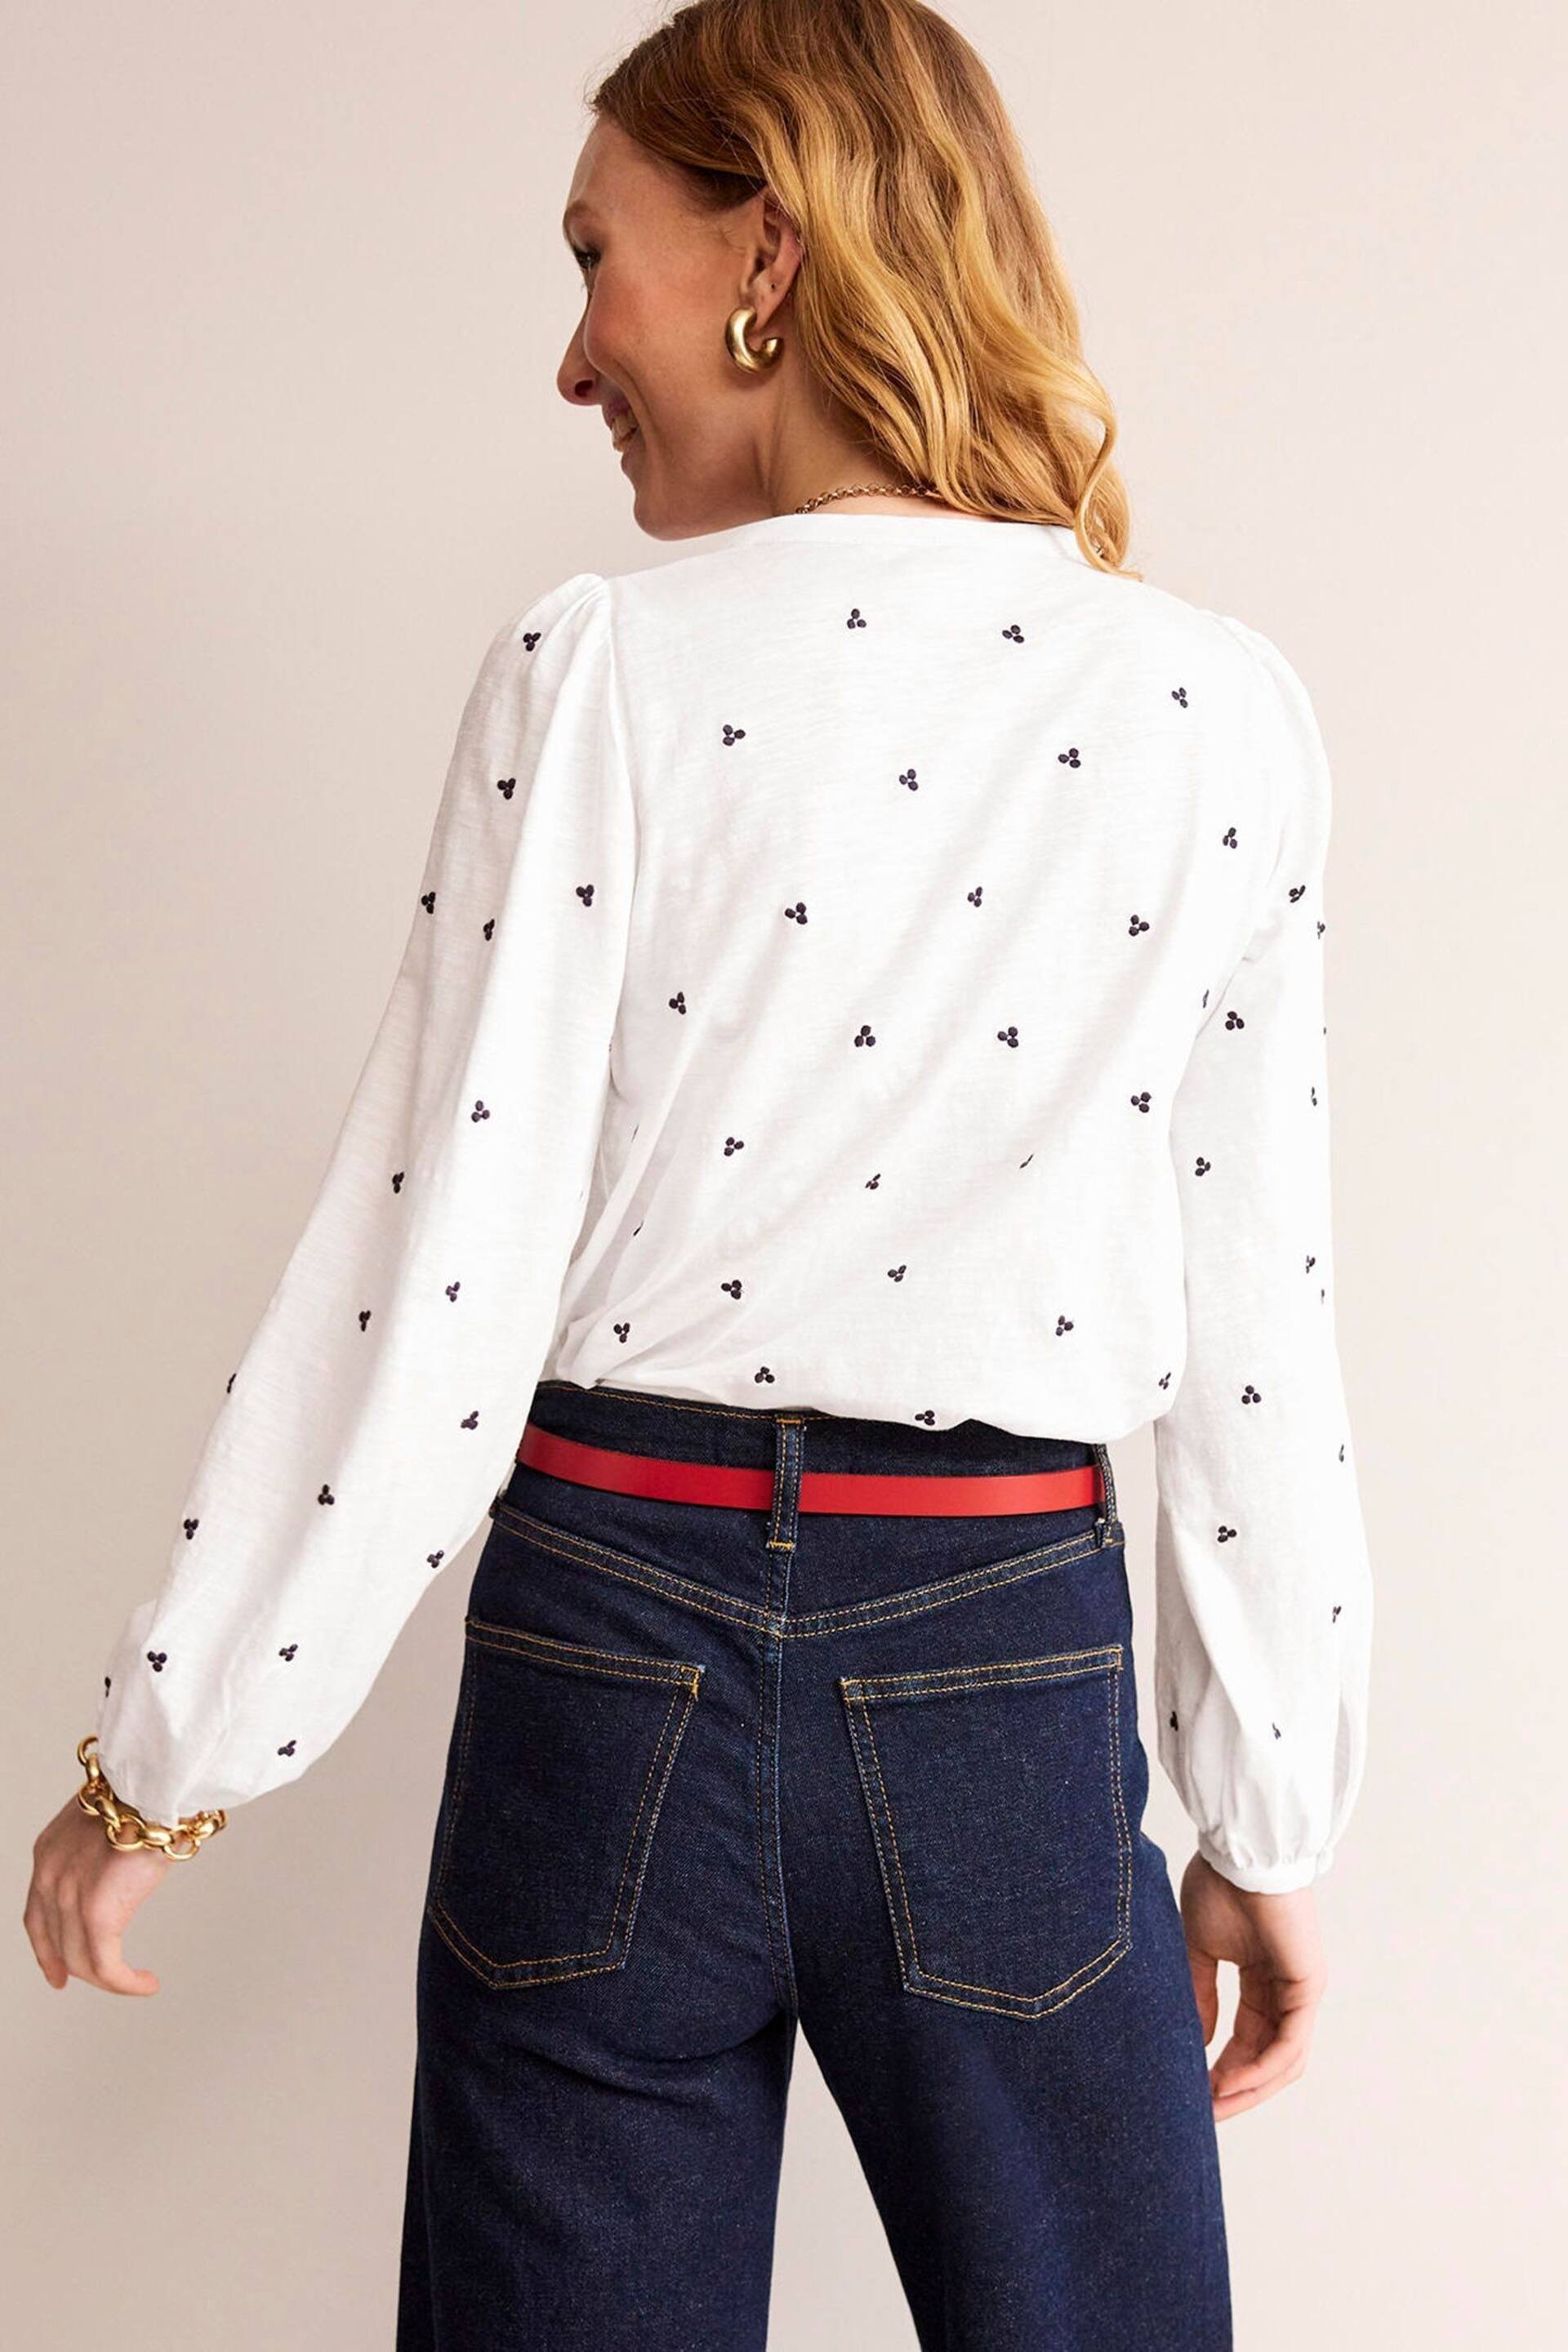 Boden White Marina Embroidered Shirt - Image 2 of 5